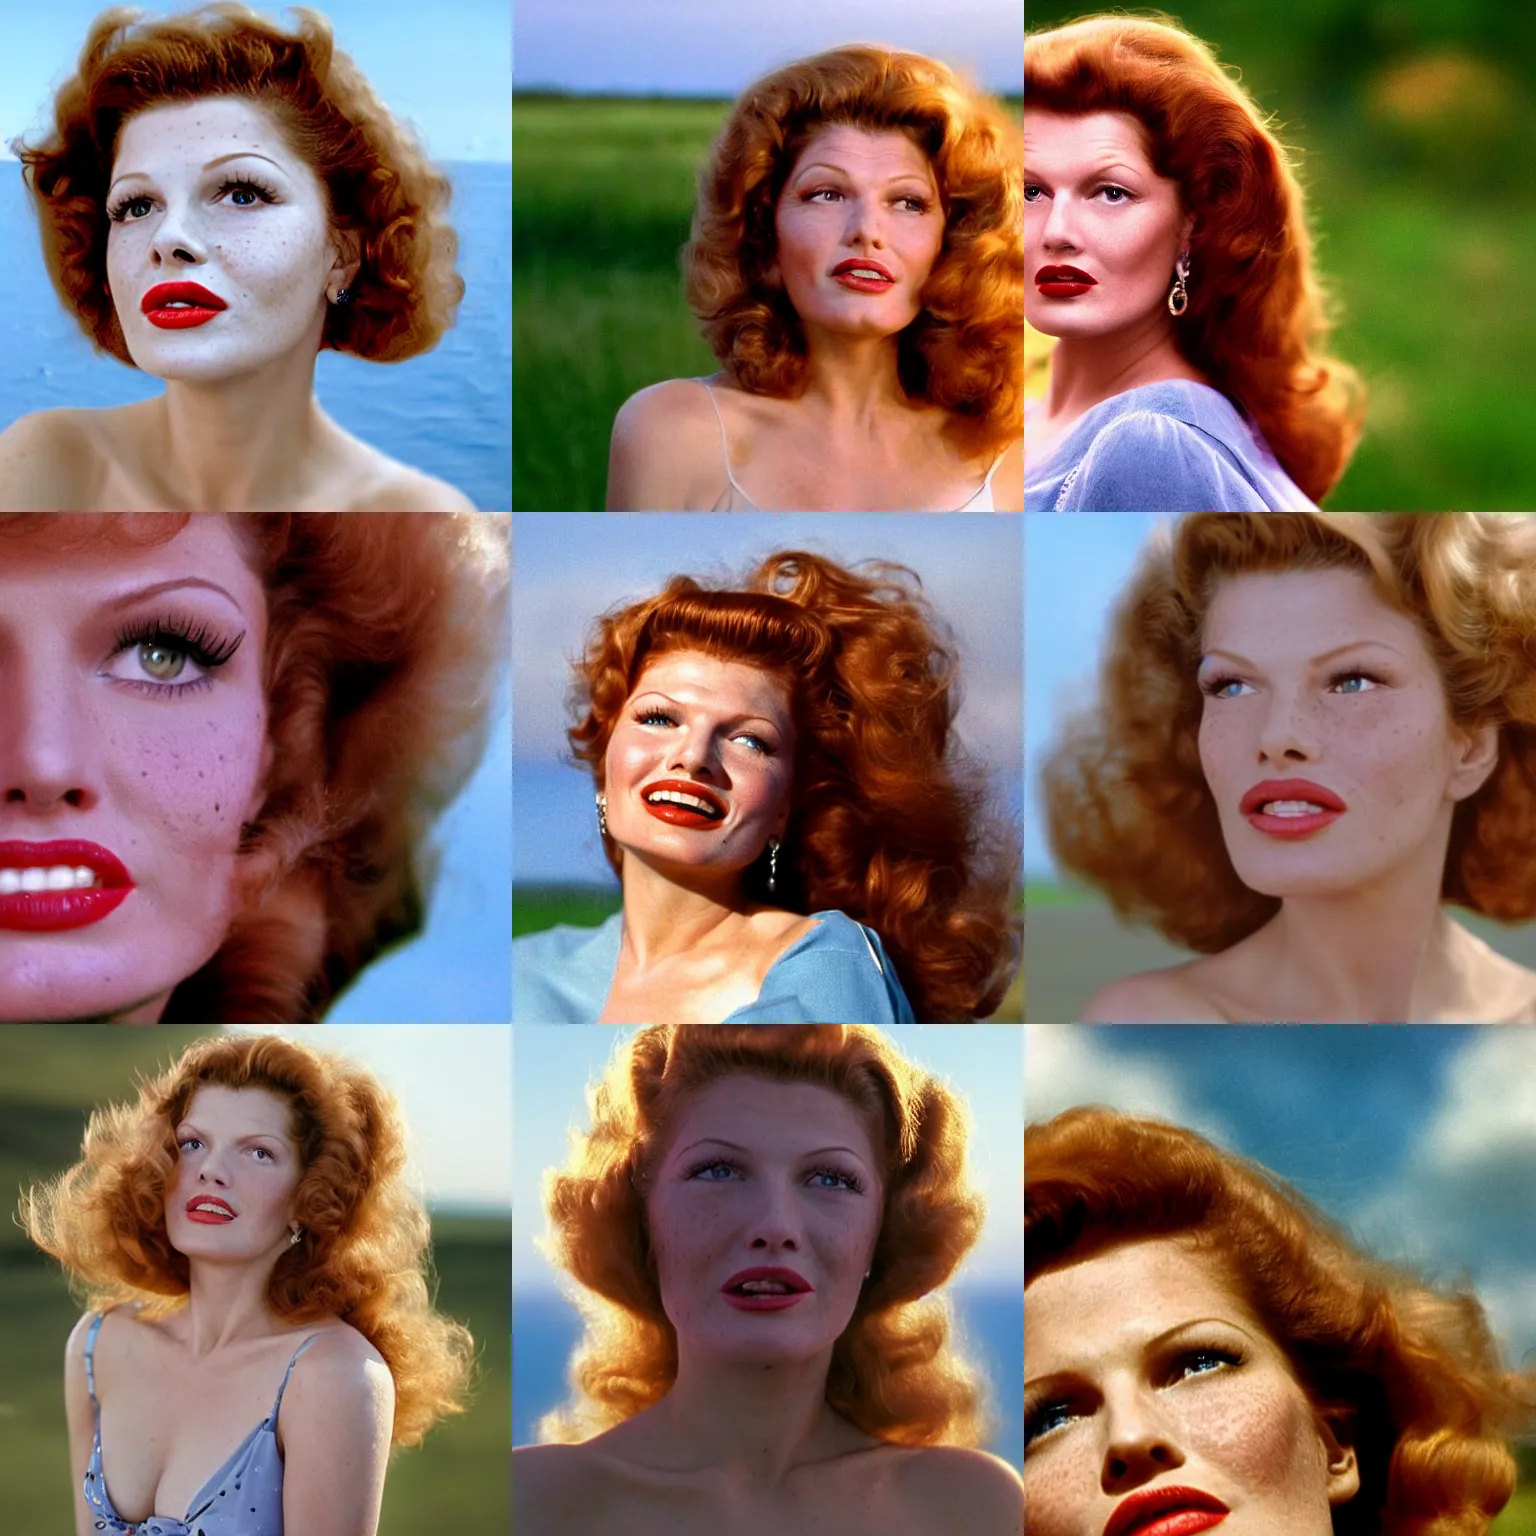 Prompt: natural 8 k close up shot from a 2 0 0 5 romantic comedy by sam mendes of rita hayworth with freckles, natural skin, beauty spots and small lips. she stands and looks on the horizon with winds moving her hair. fuzzy blue sky in the background. no make - up, no lipstick, small details, natural lighting, 8 5 mm lenses, sharp focus